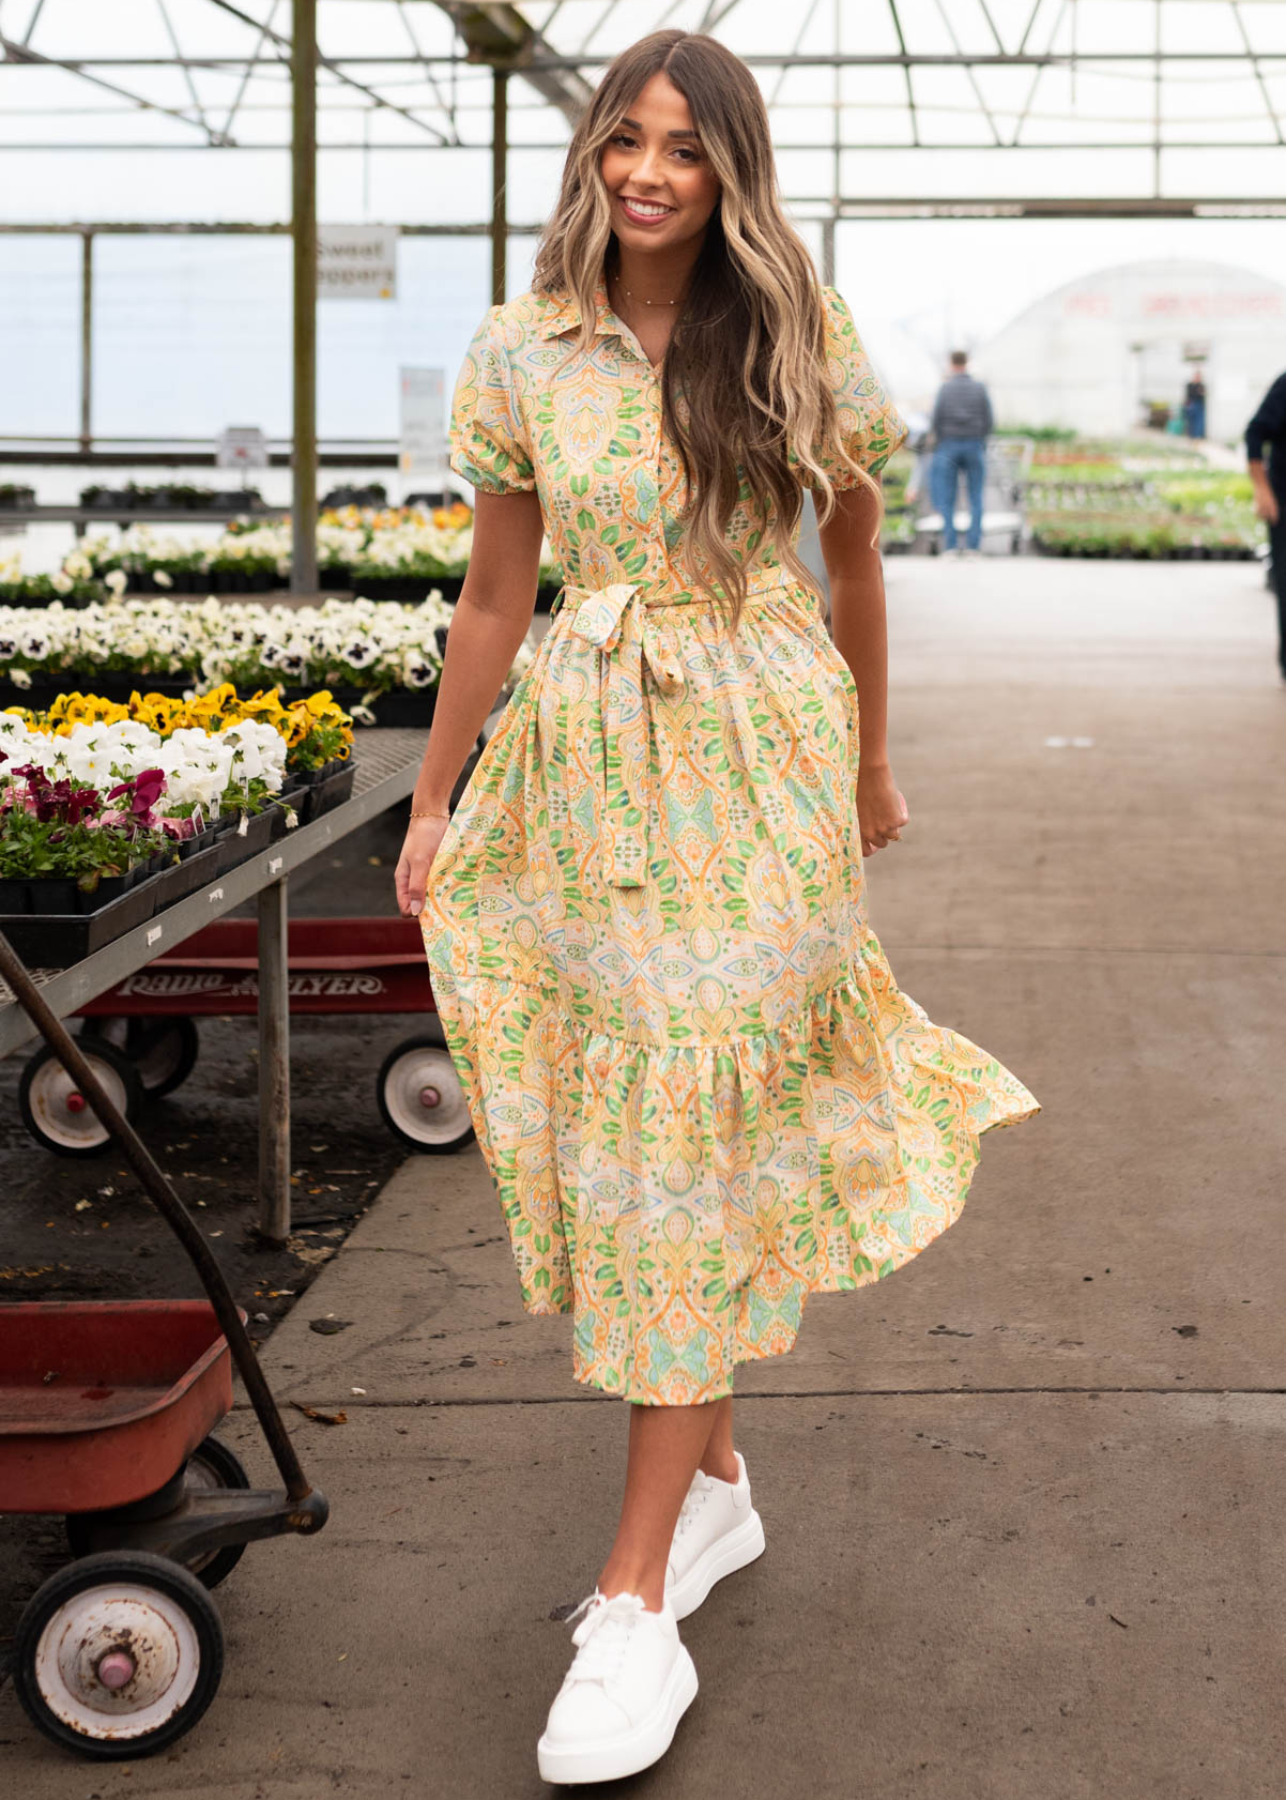 Green floral dress with a tie at the waist and collar